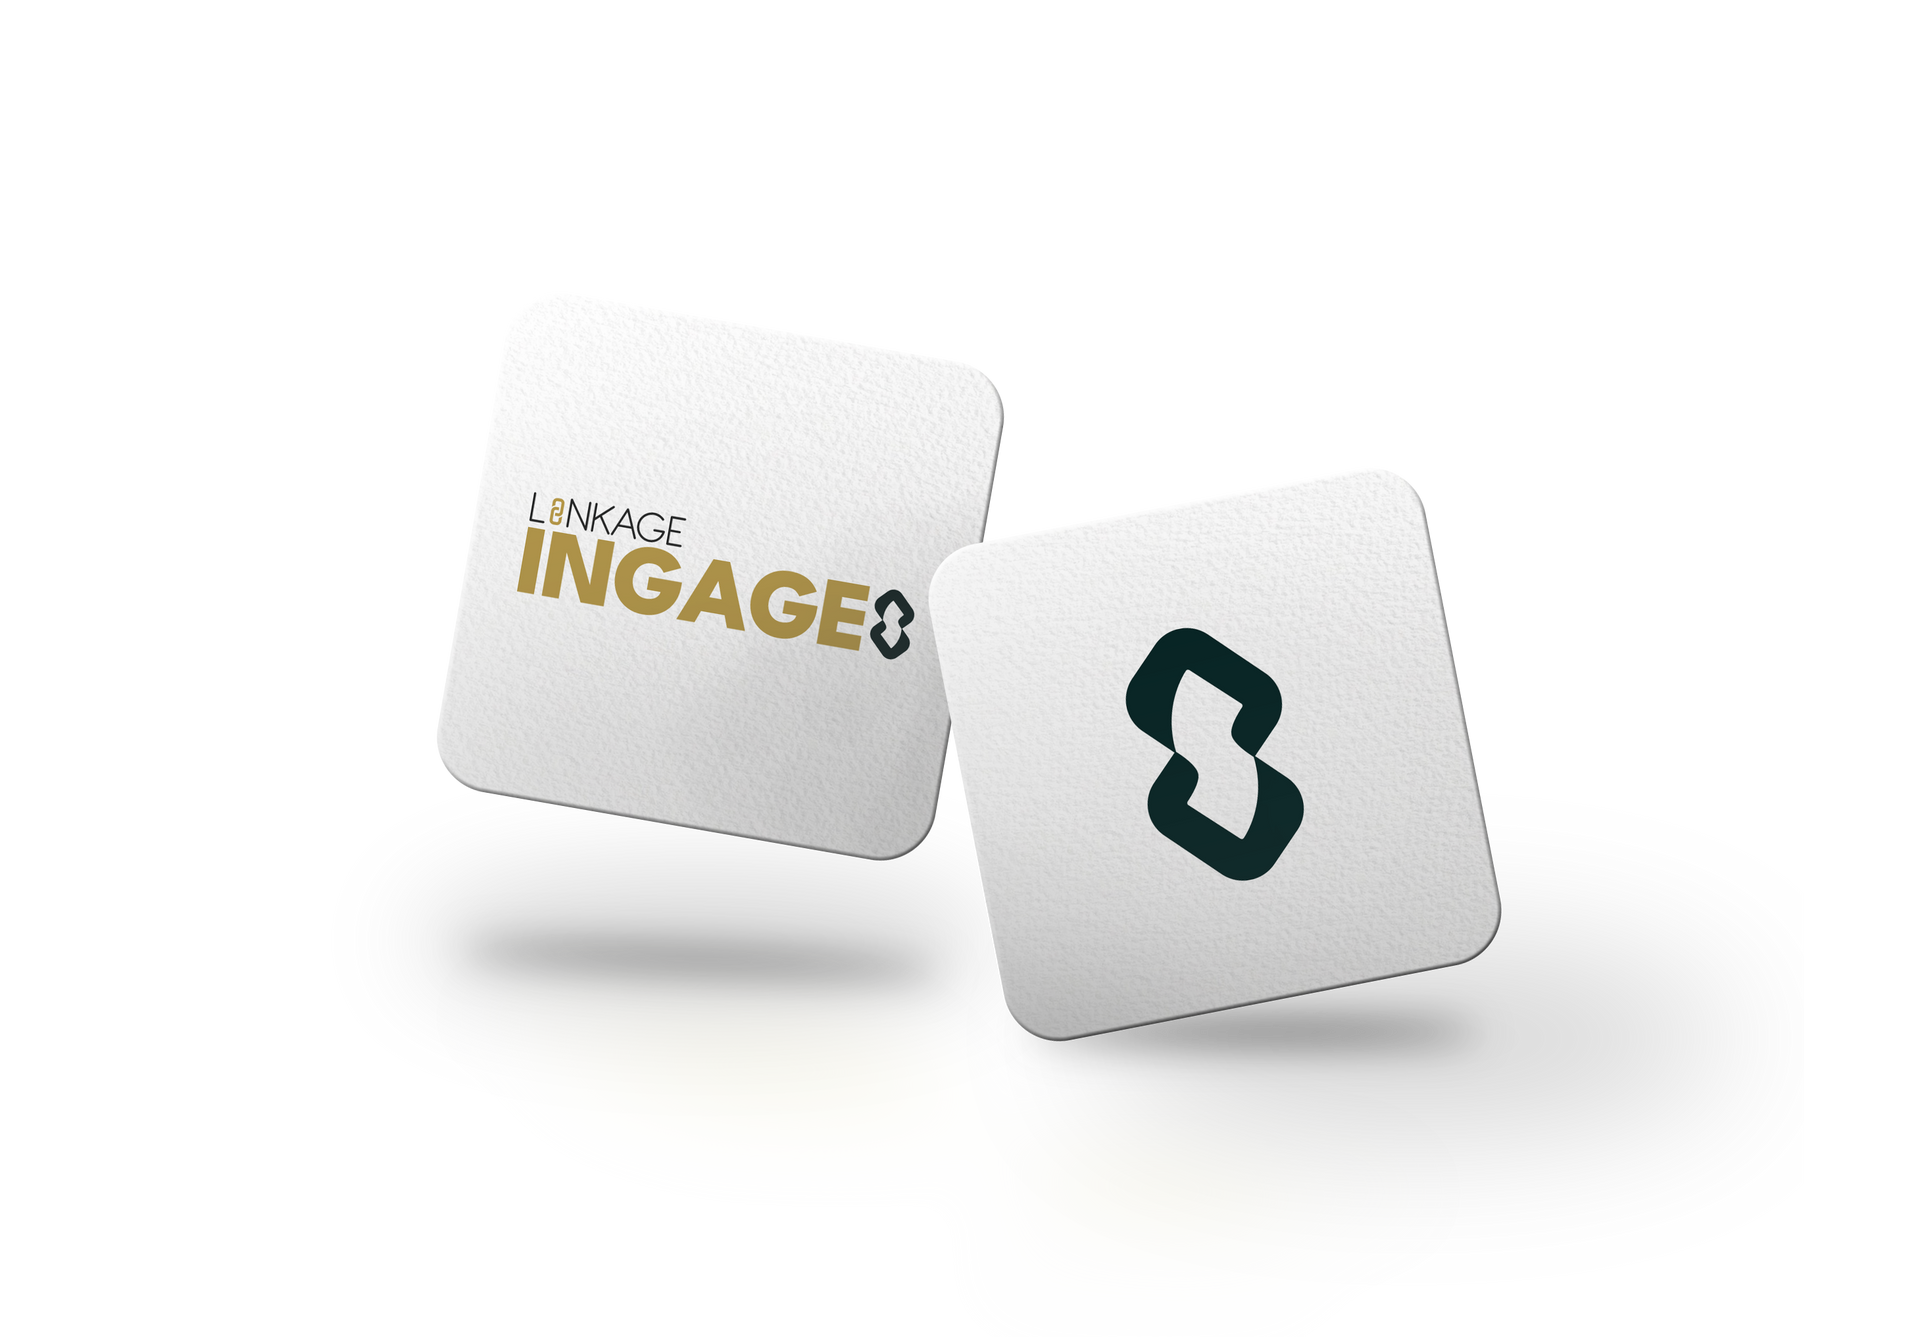 Linkage Ingage by Hotel Linkage. Advance Email Marketing Suite for Hotel Linkage